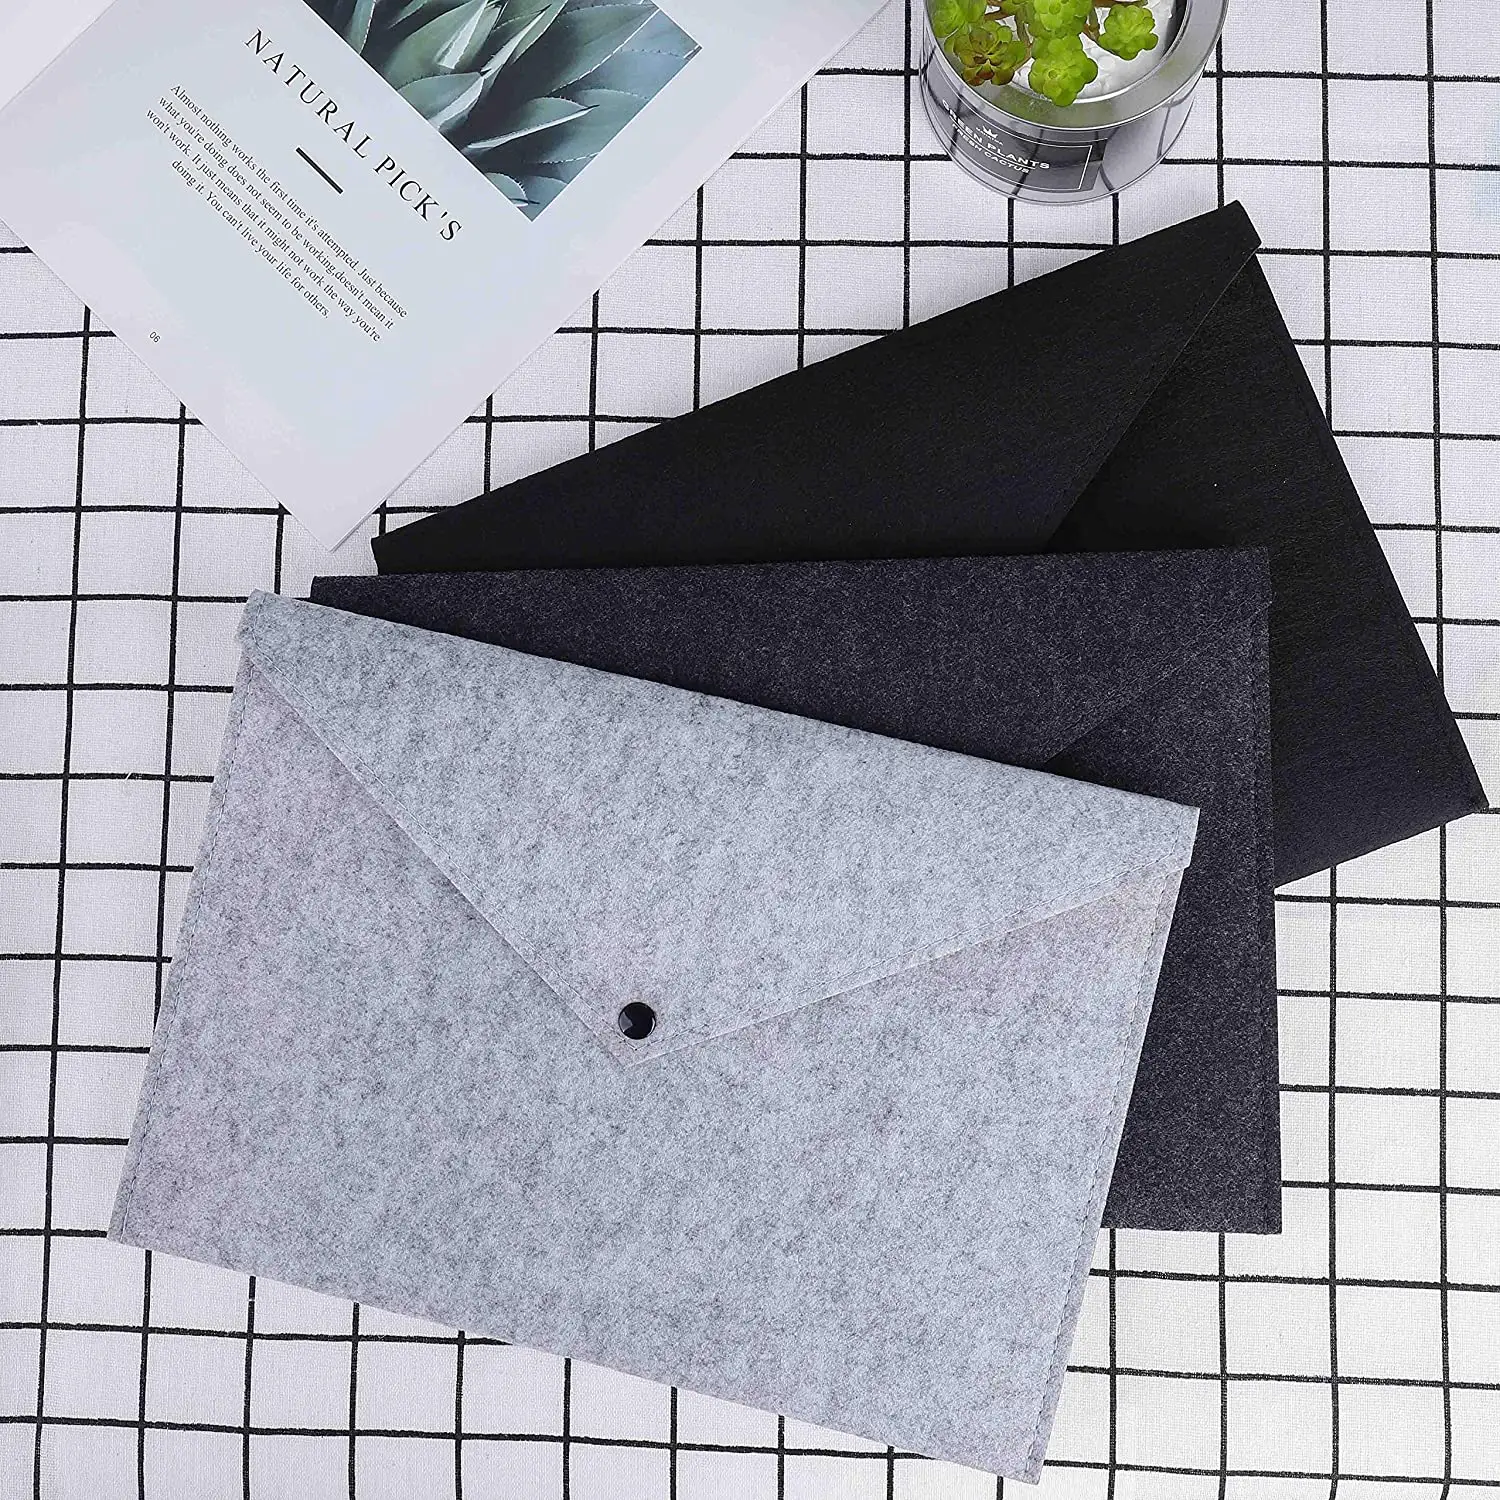 Hot sales factory price ecological felt laptop sleeve pouch